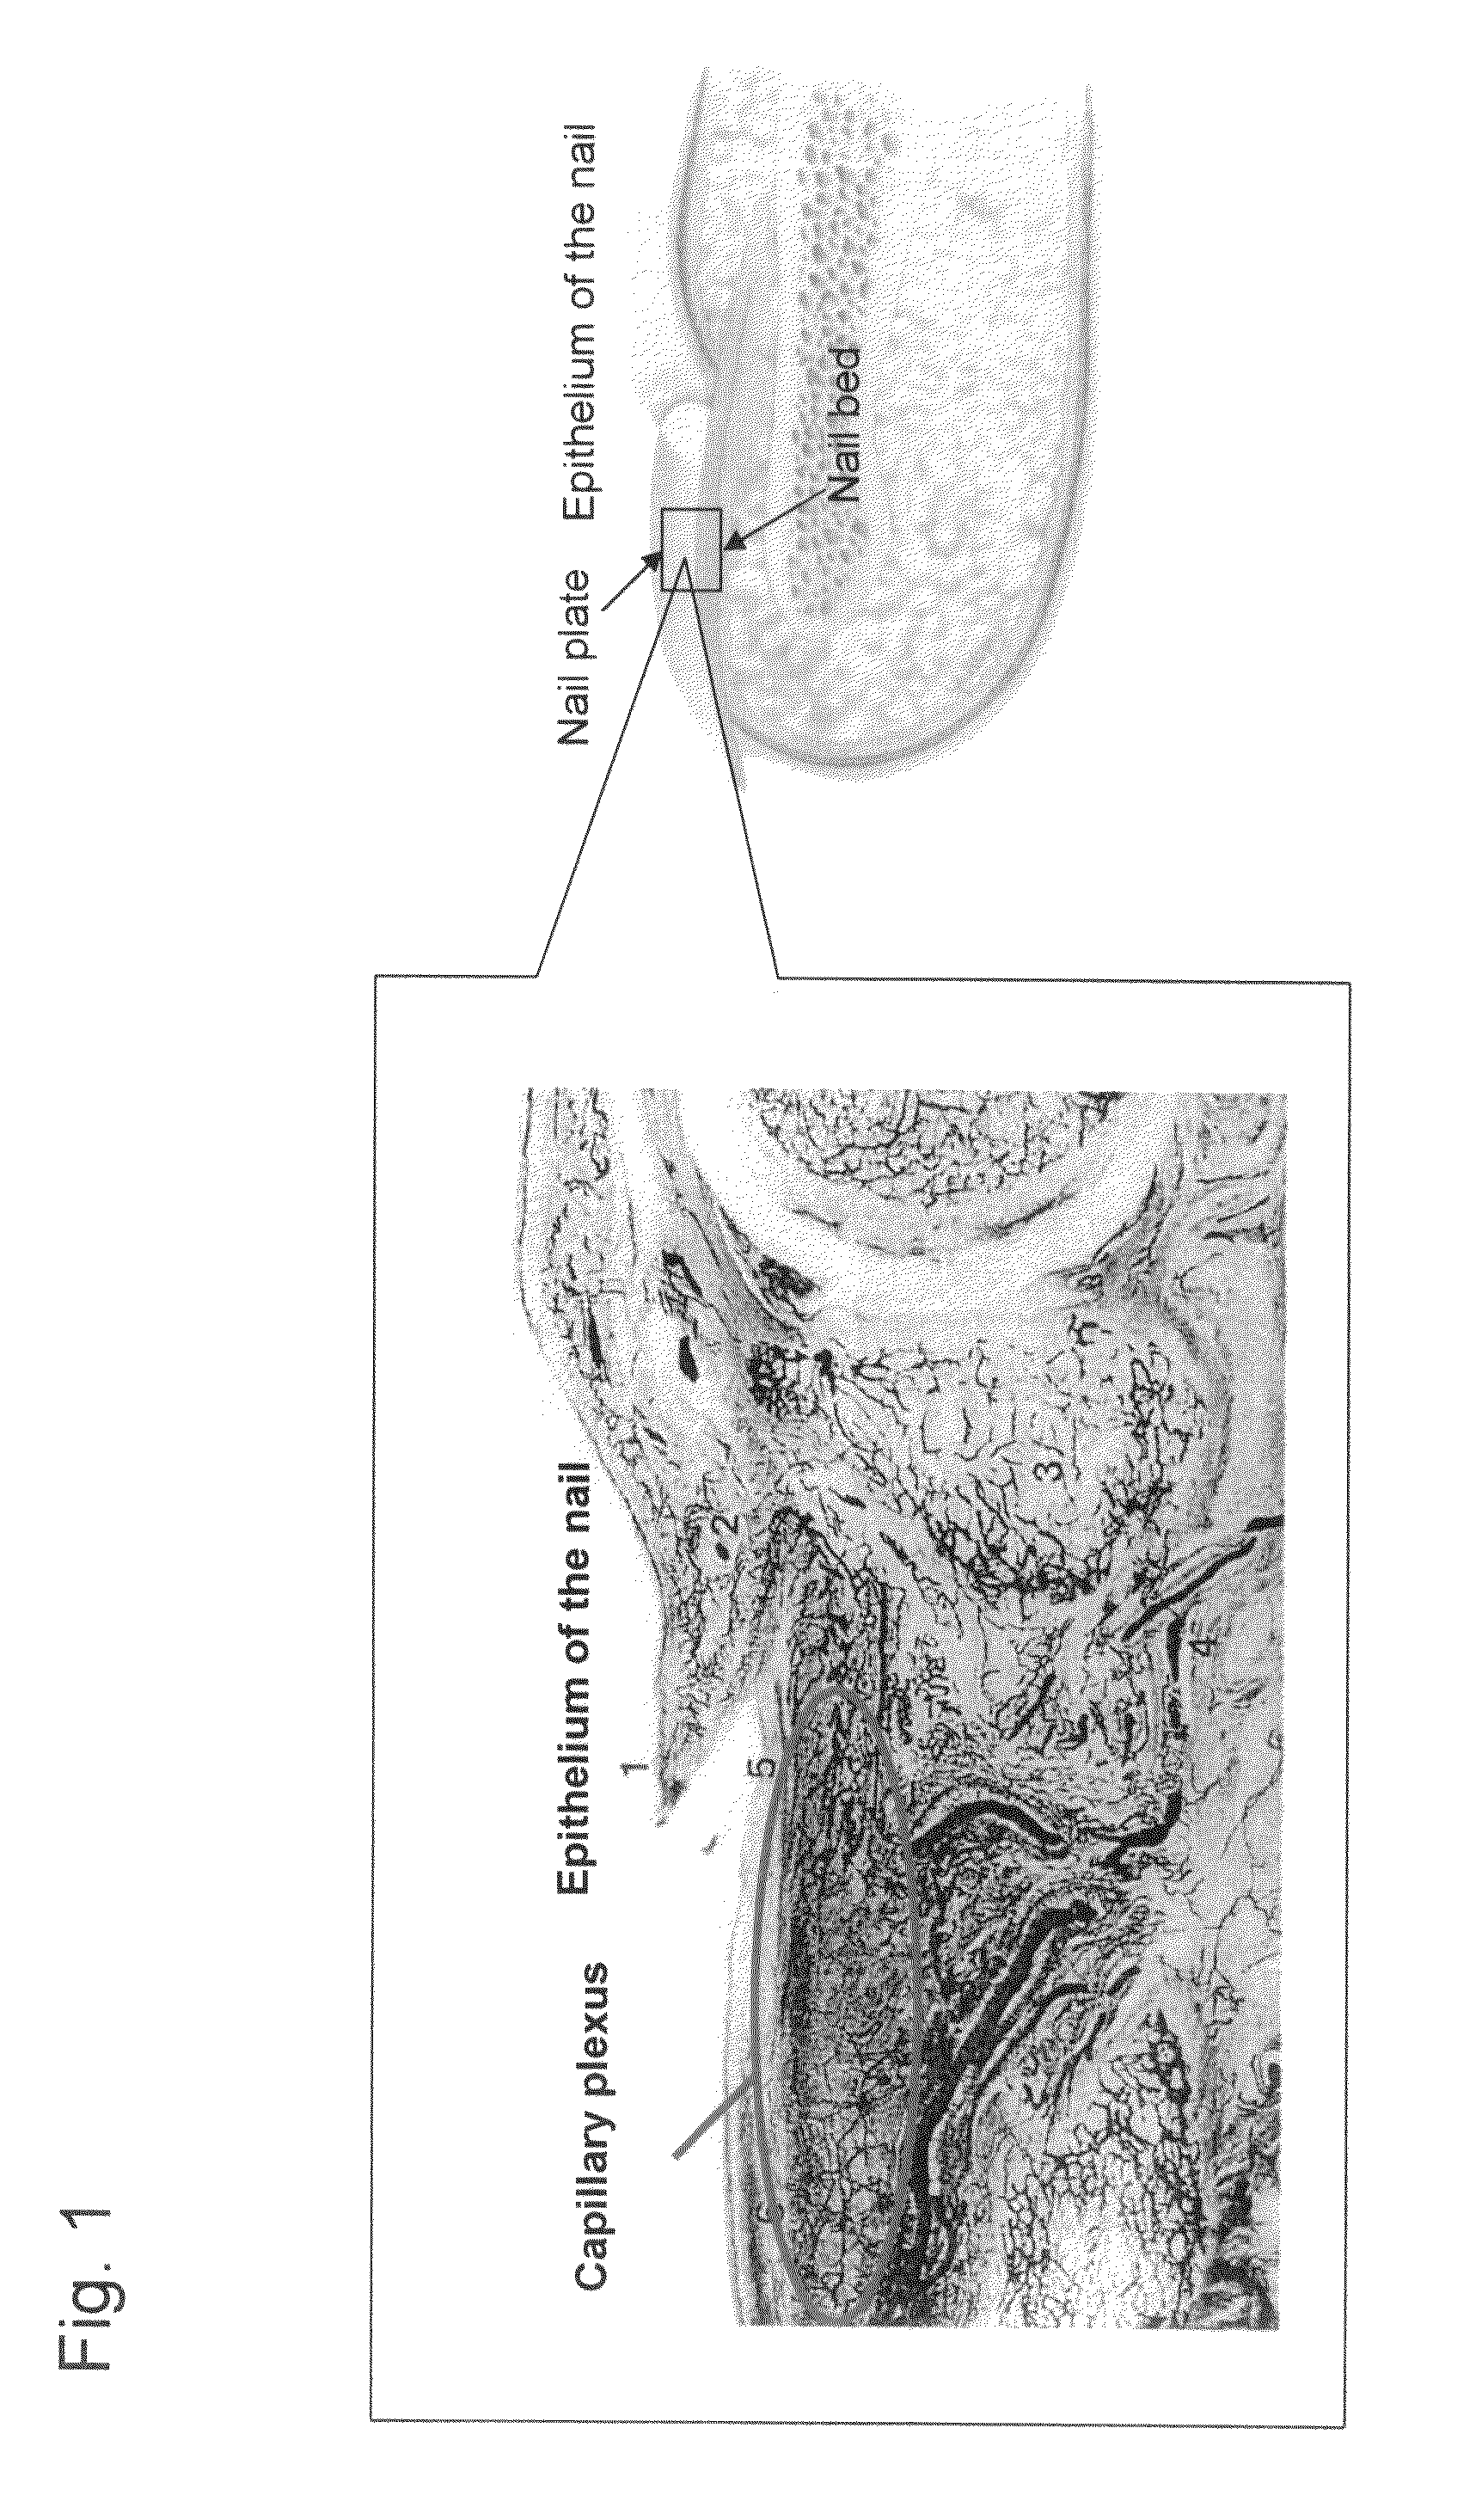 Noninvasive measuring device for substance in blood via nail and a nail evaporation device